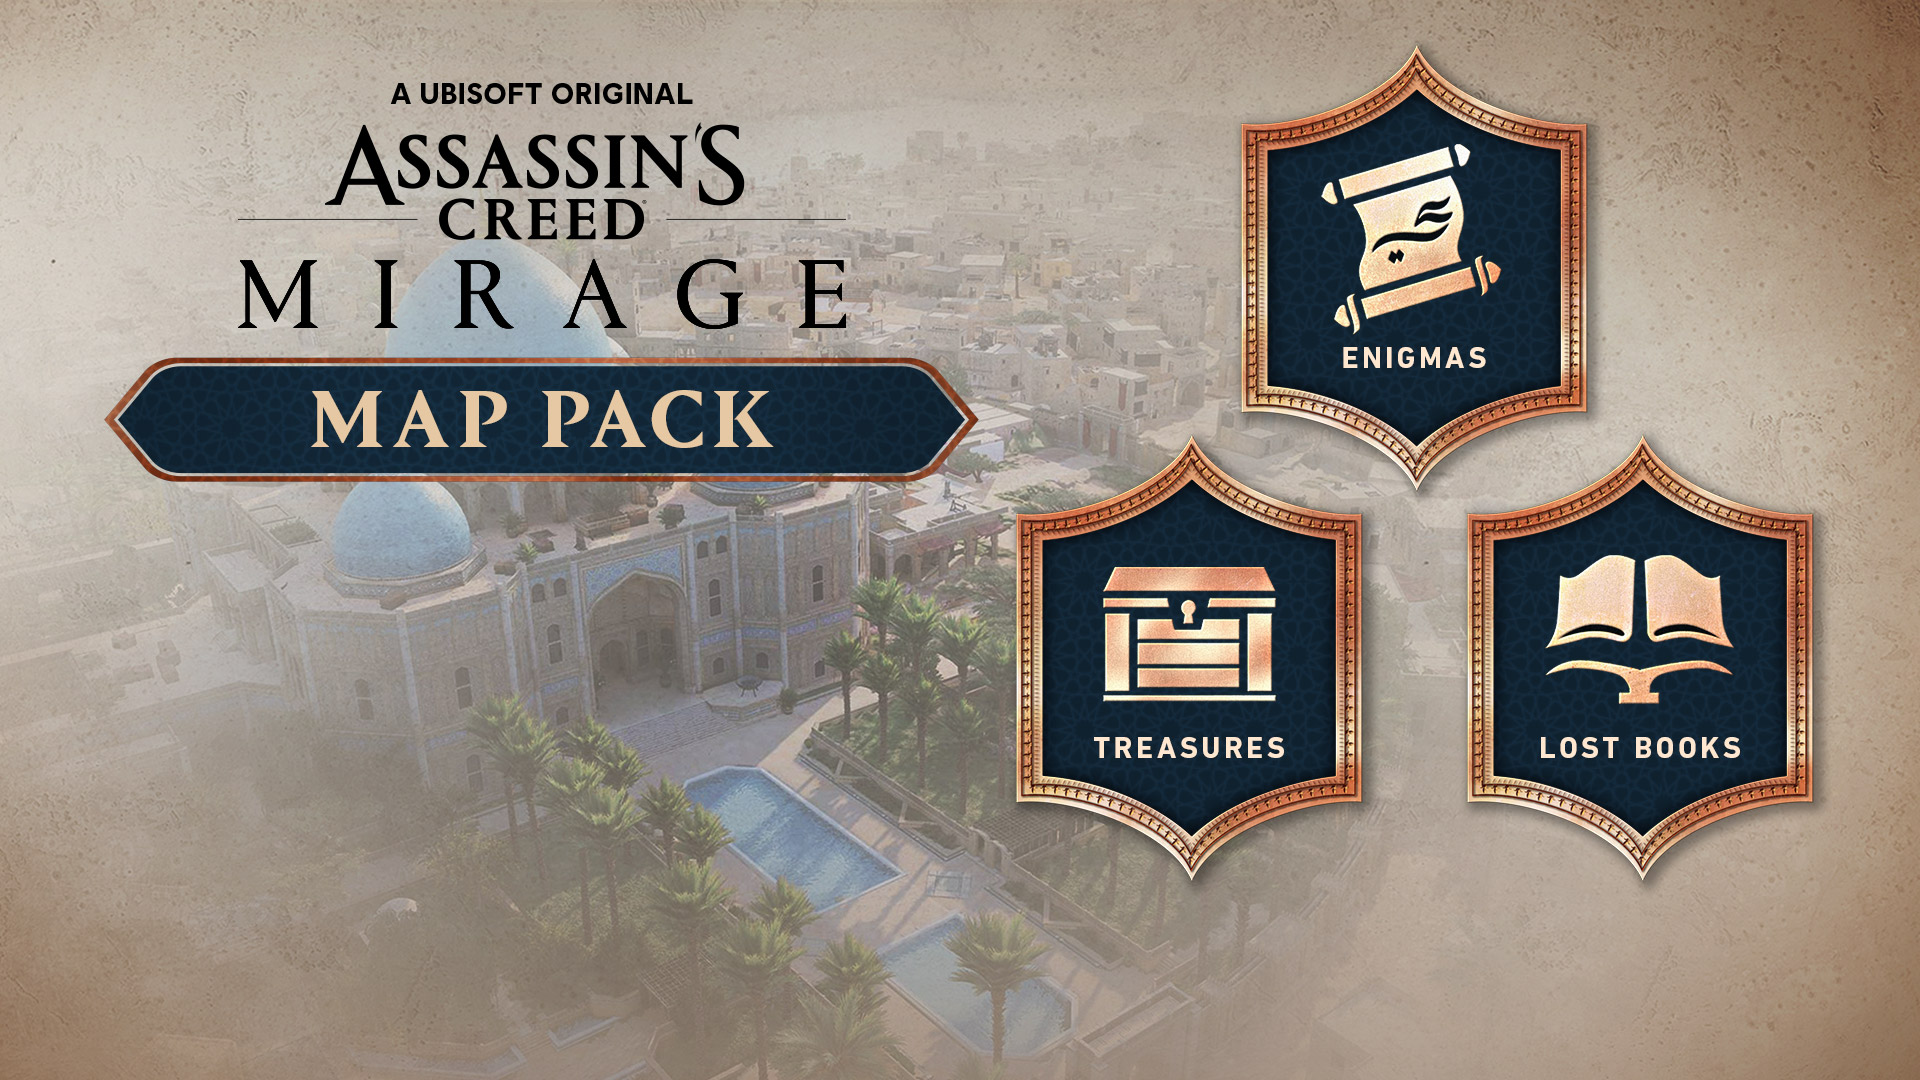 Assassin's Creed Mirage - Map Pack DLC AR XBOX One / Xbox Series X|S CD Key 7.9$